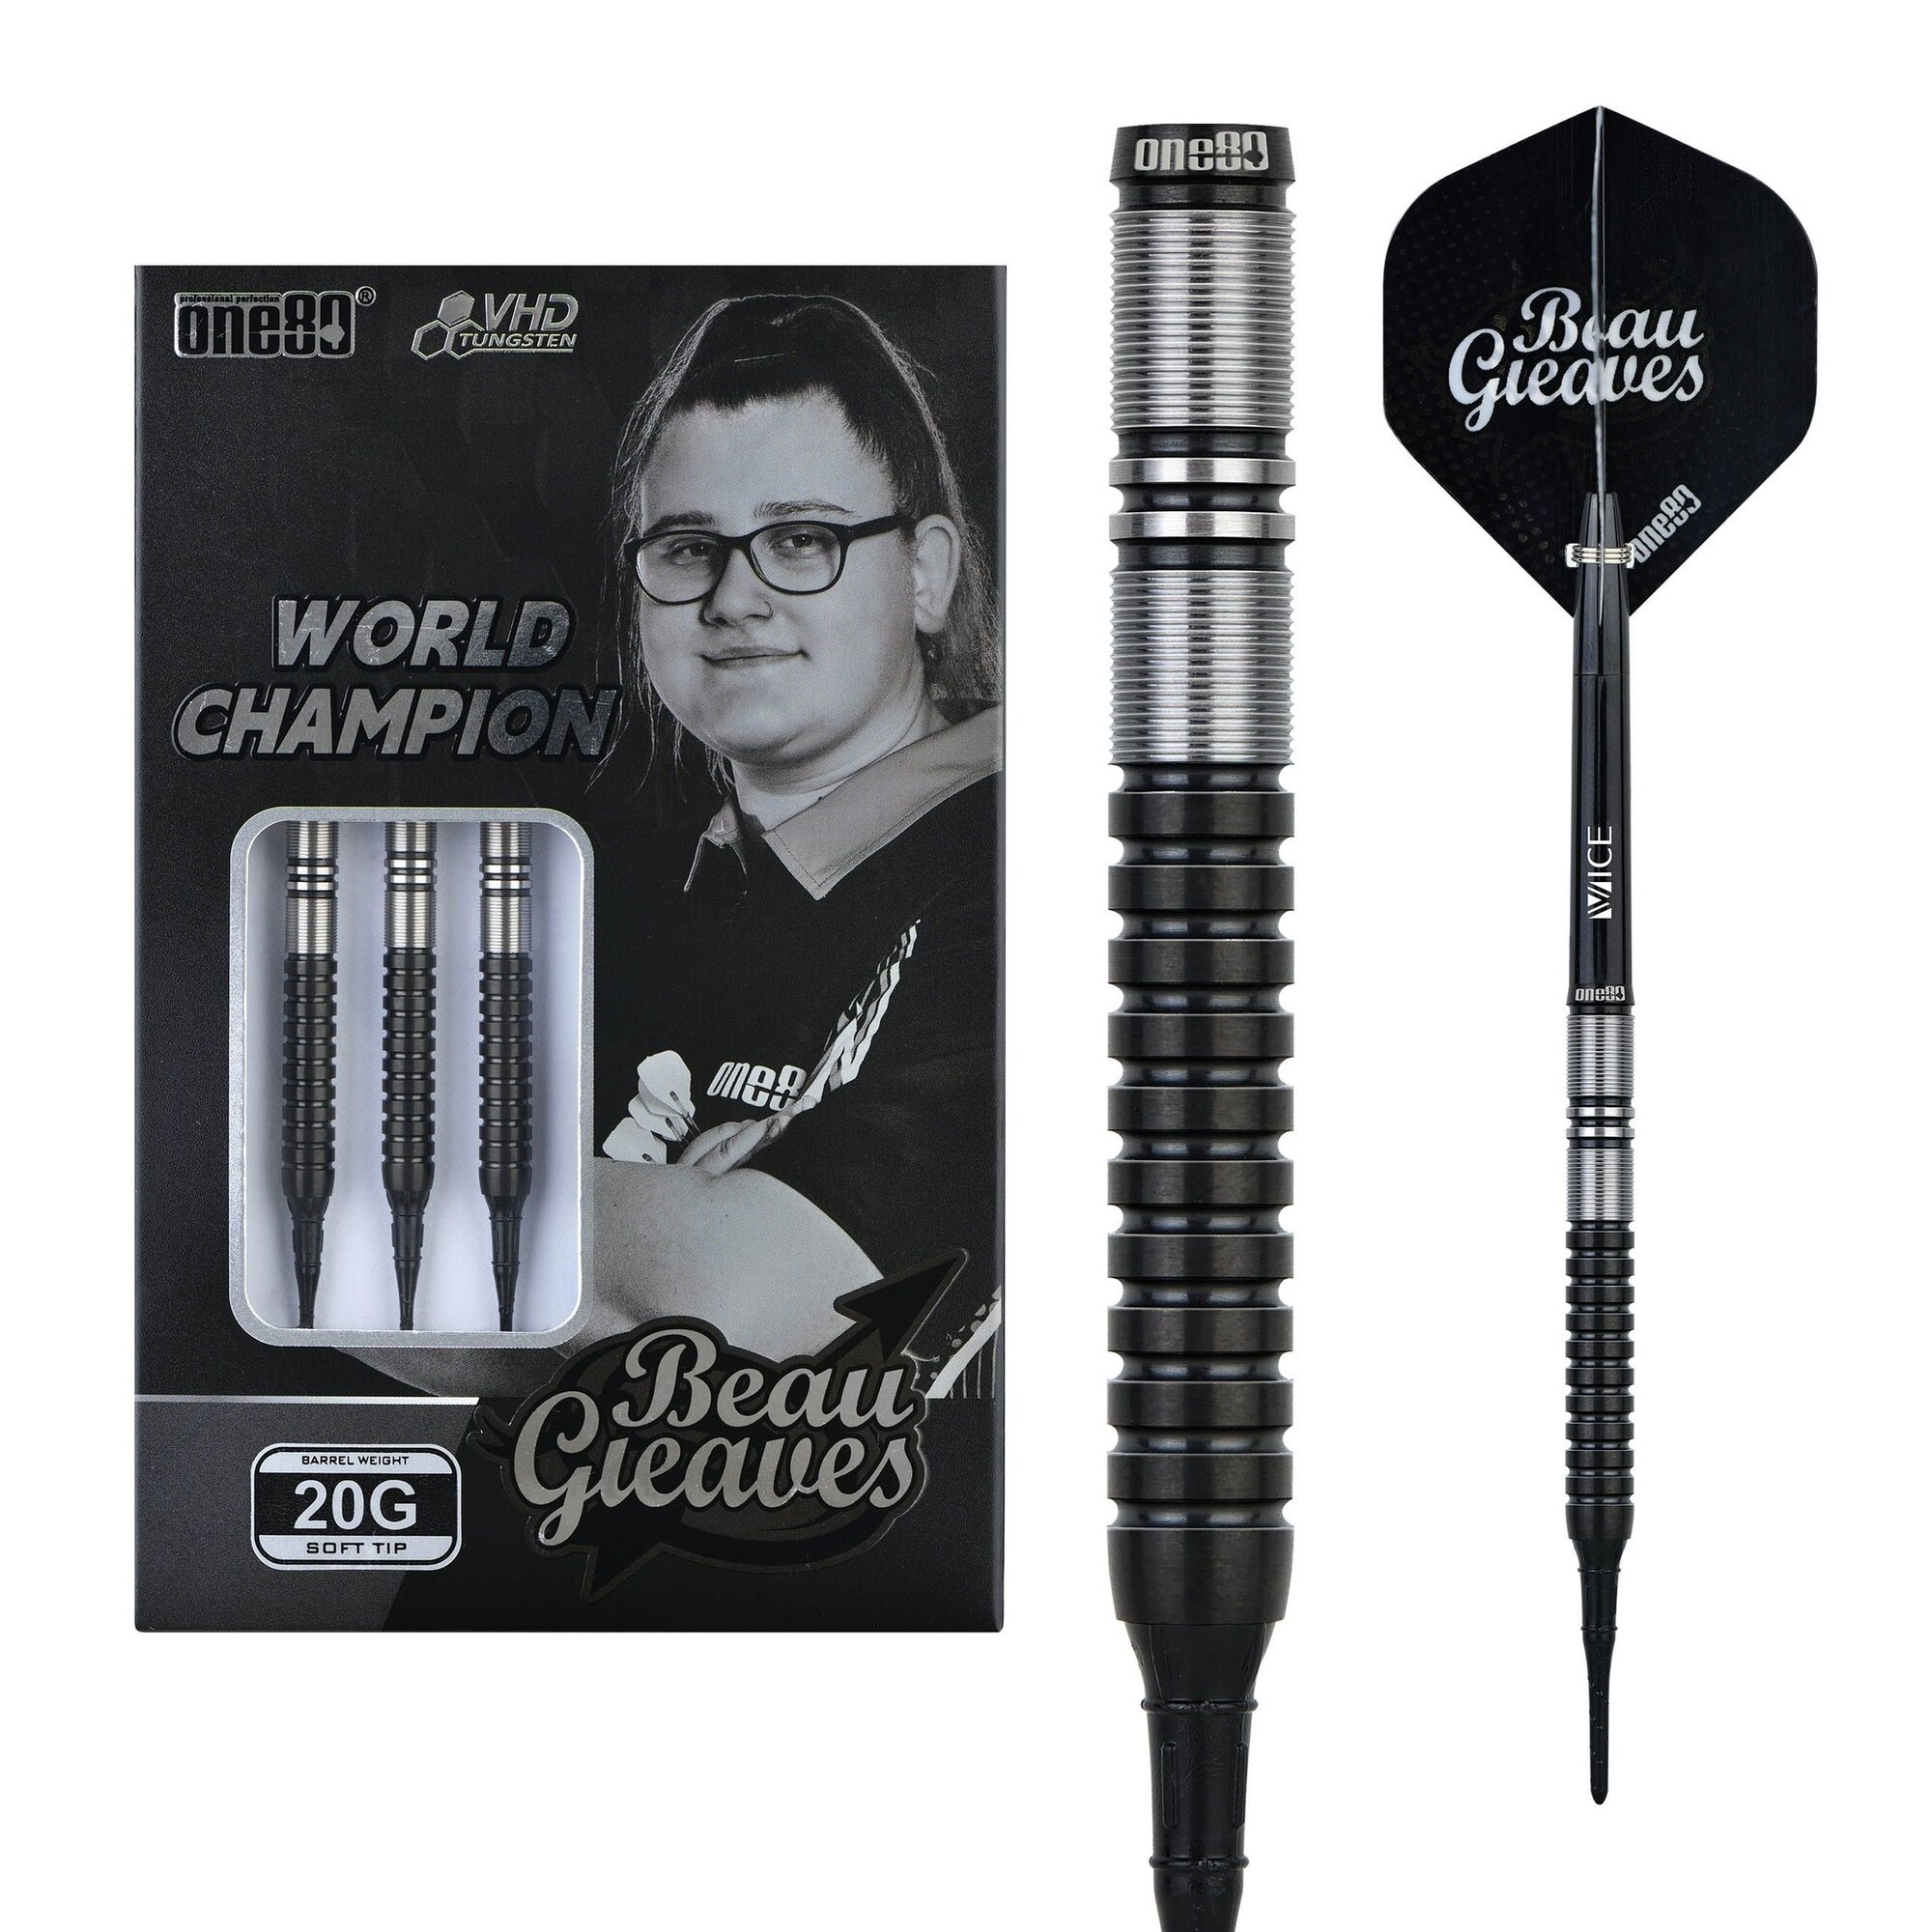 ONE80 Beau Greaves VHD Black Edition 90%  Soft Tip Darts